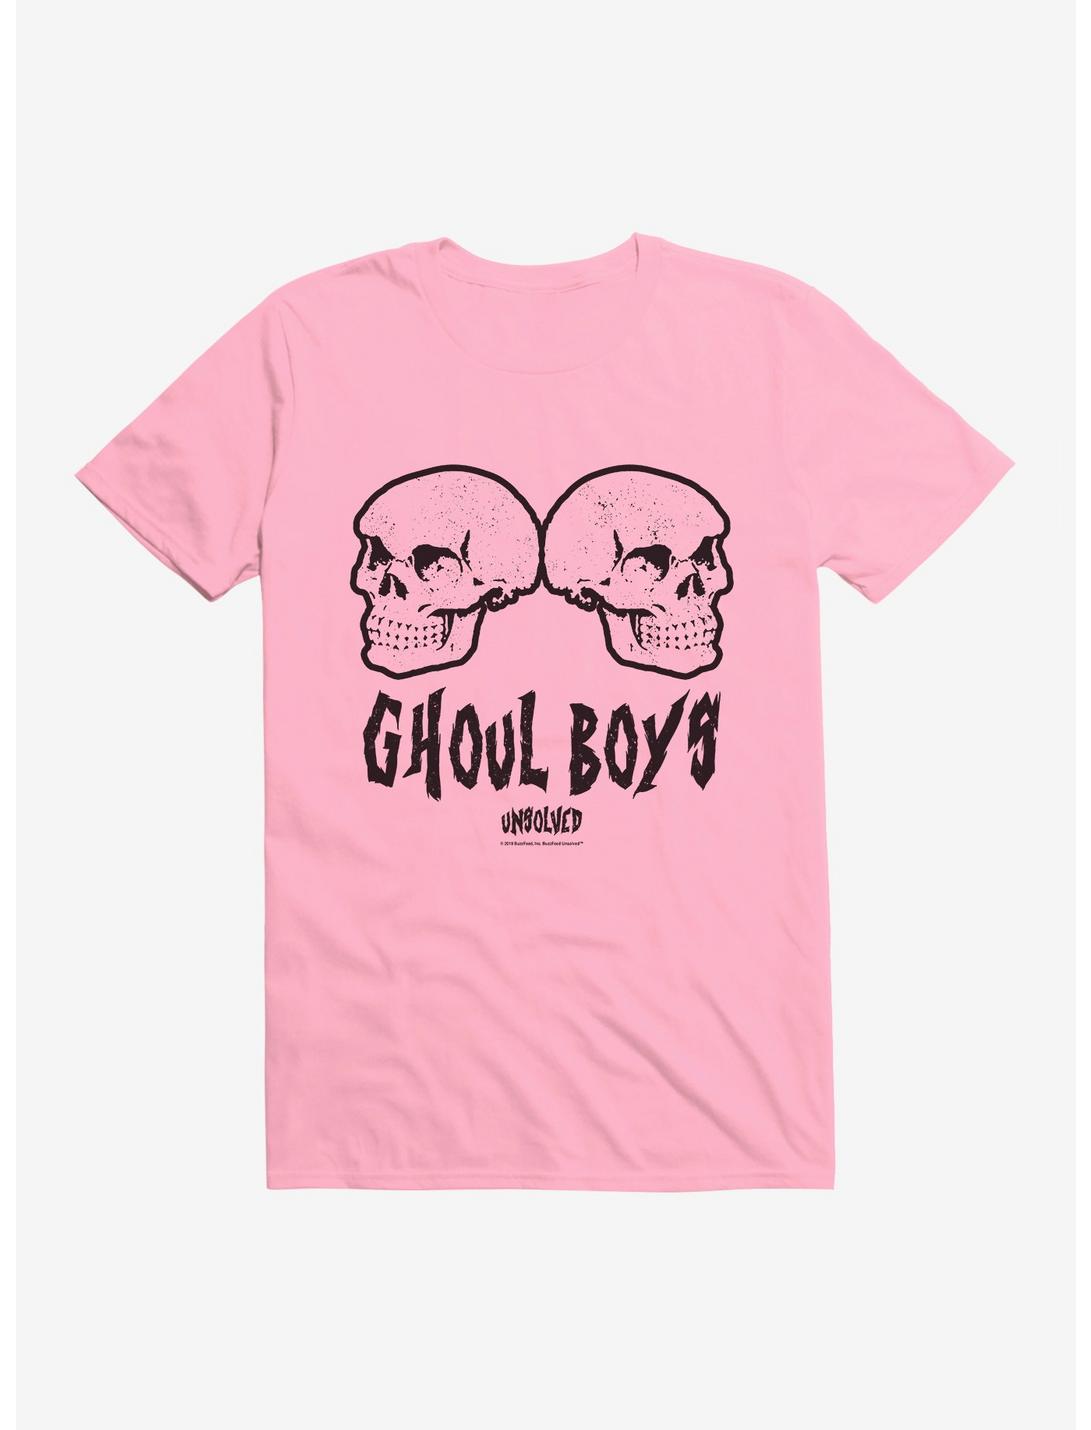 Buzzfeed Unsolved Ghoul Boys T-Shirt, CHARITY PINK, hi-res